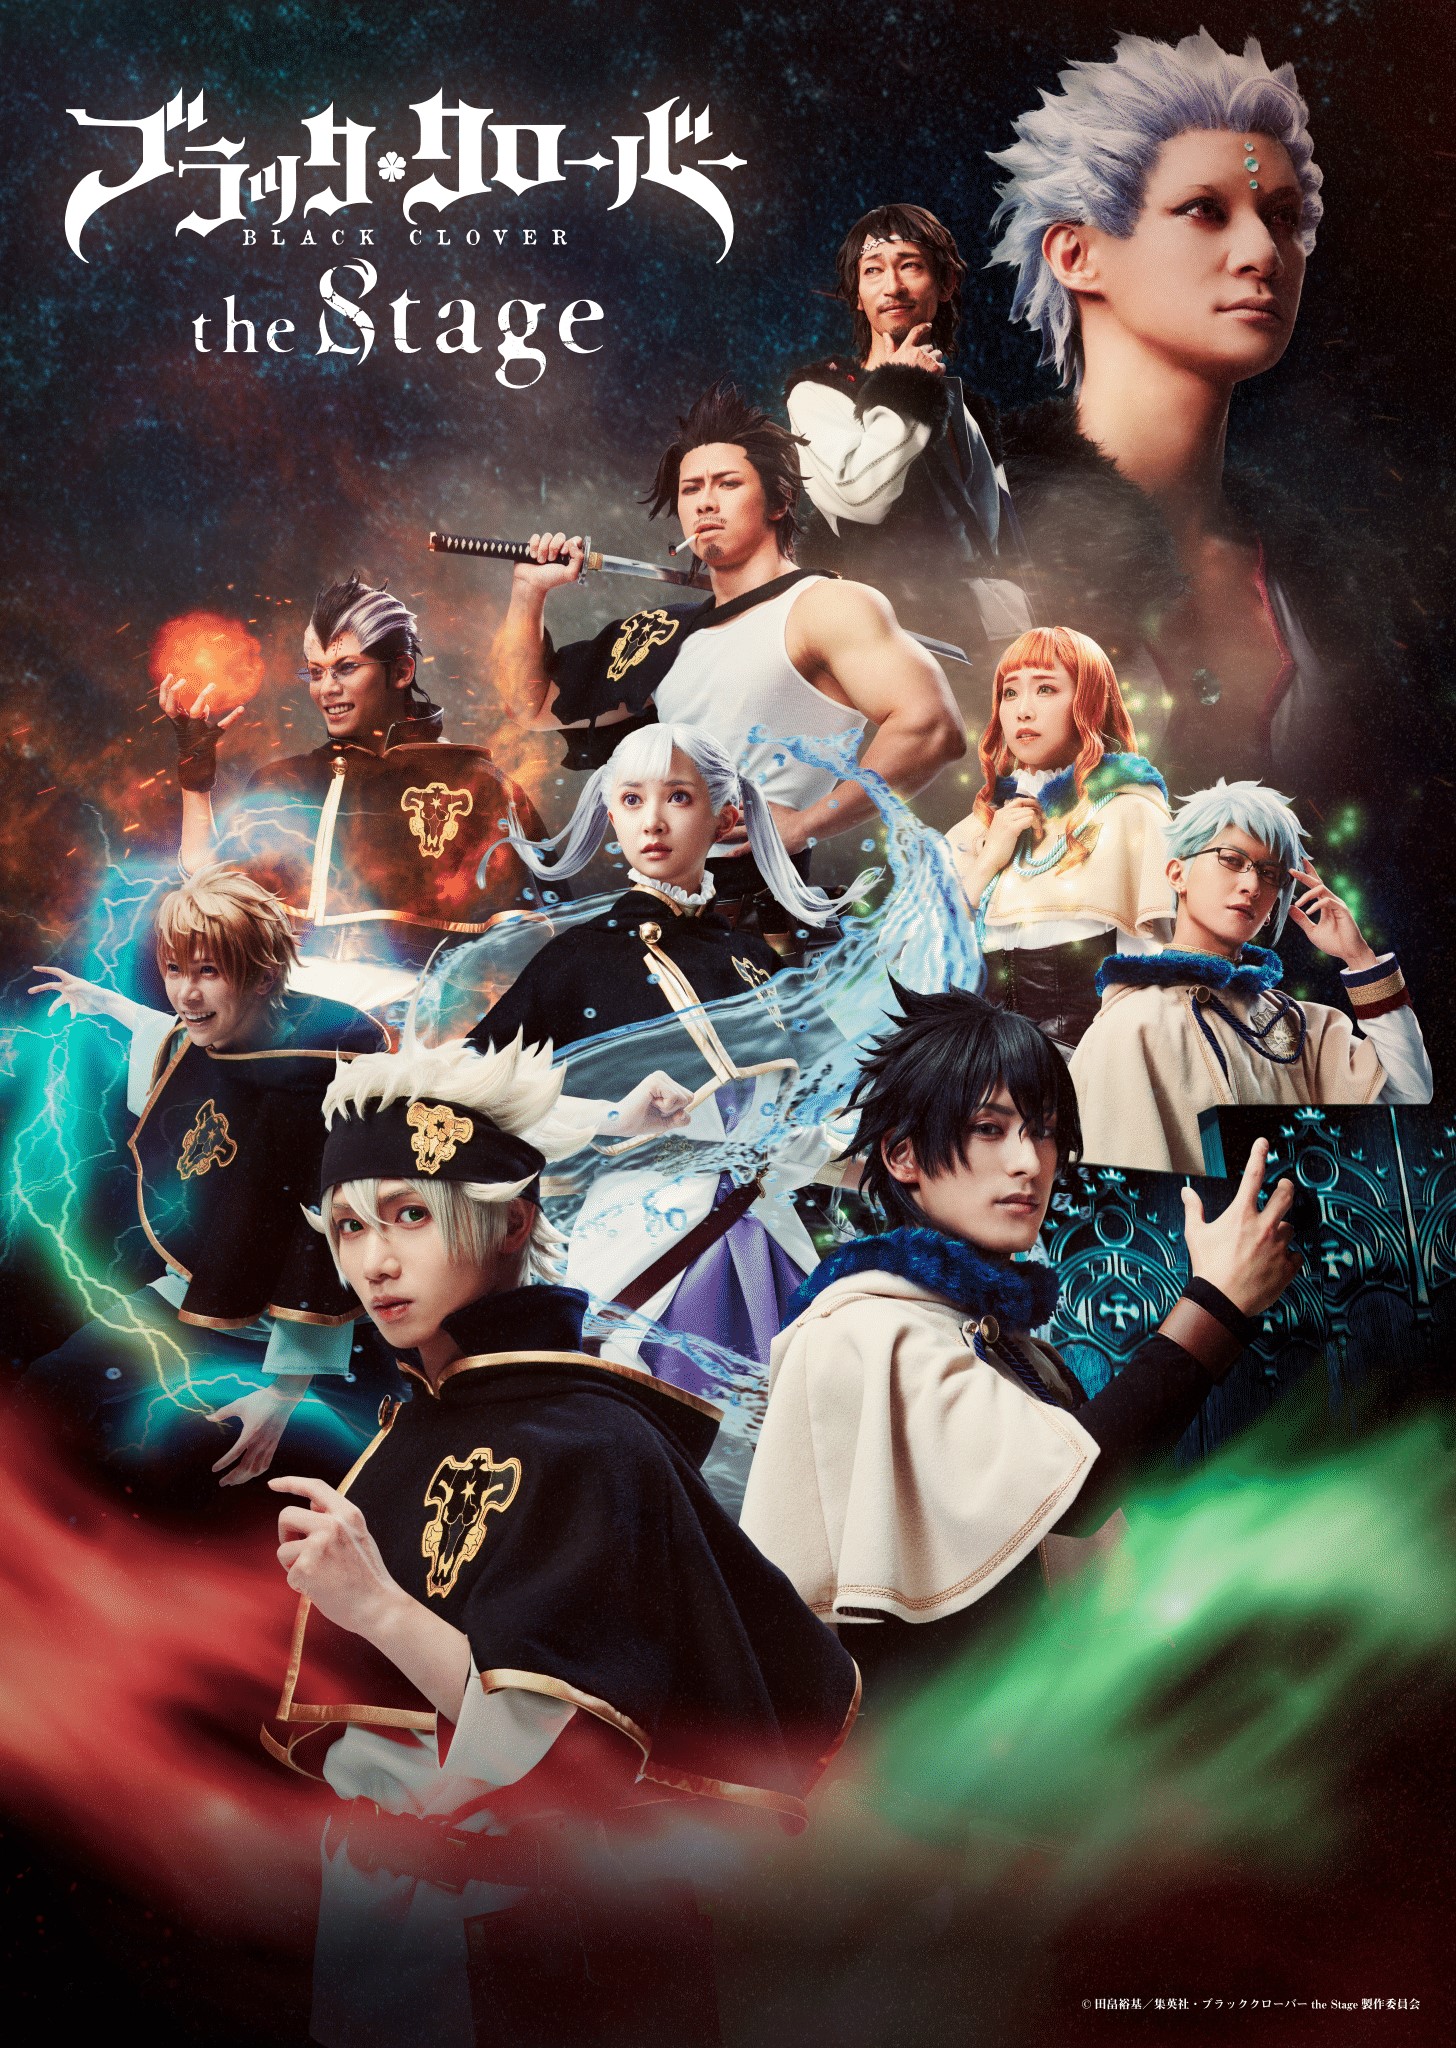 BLACK CLOVER the Stage